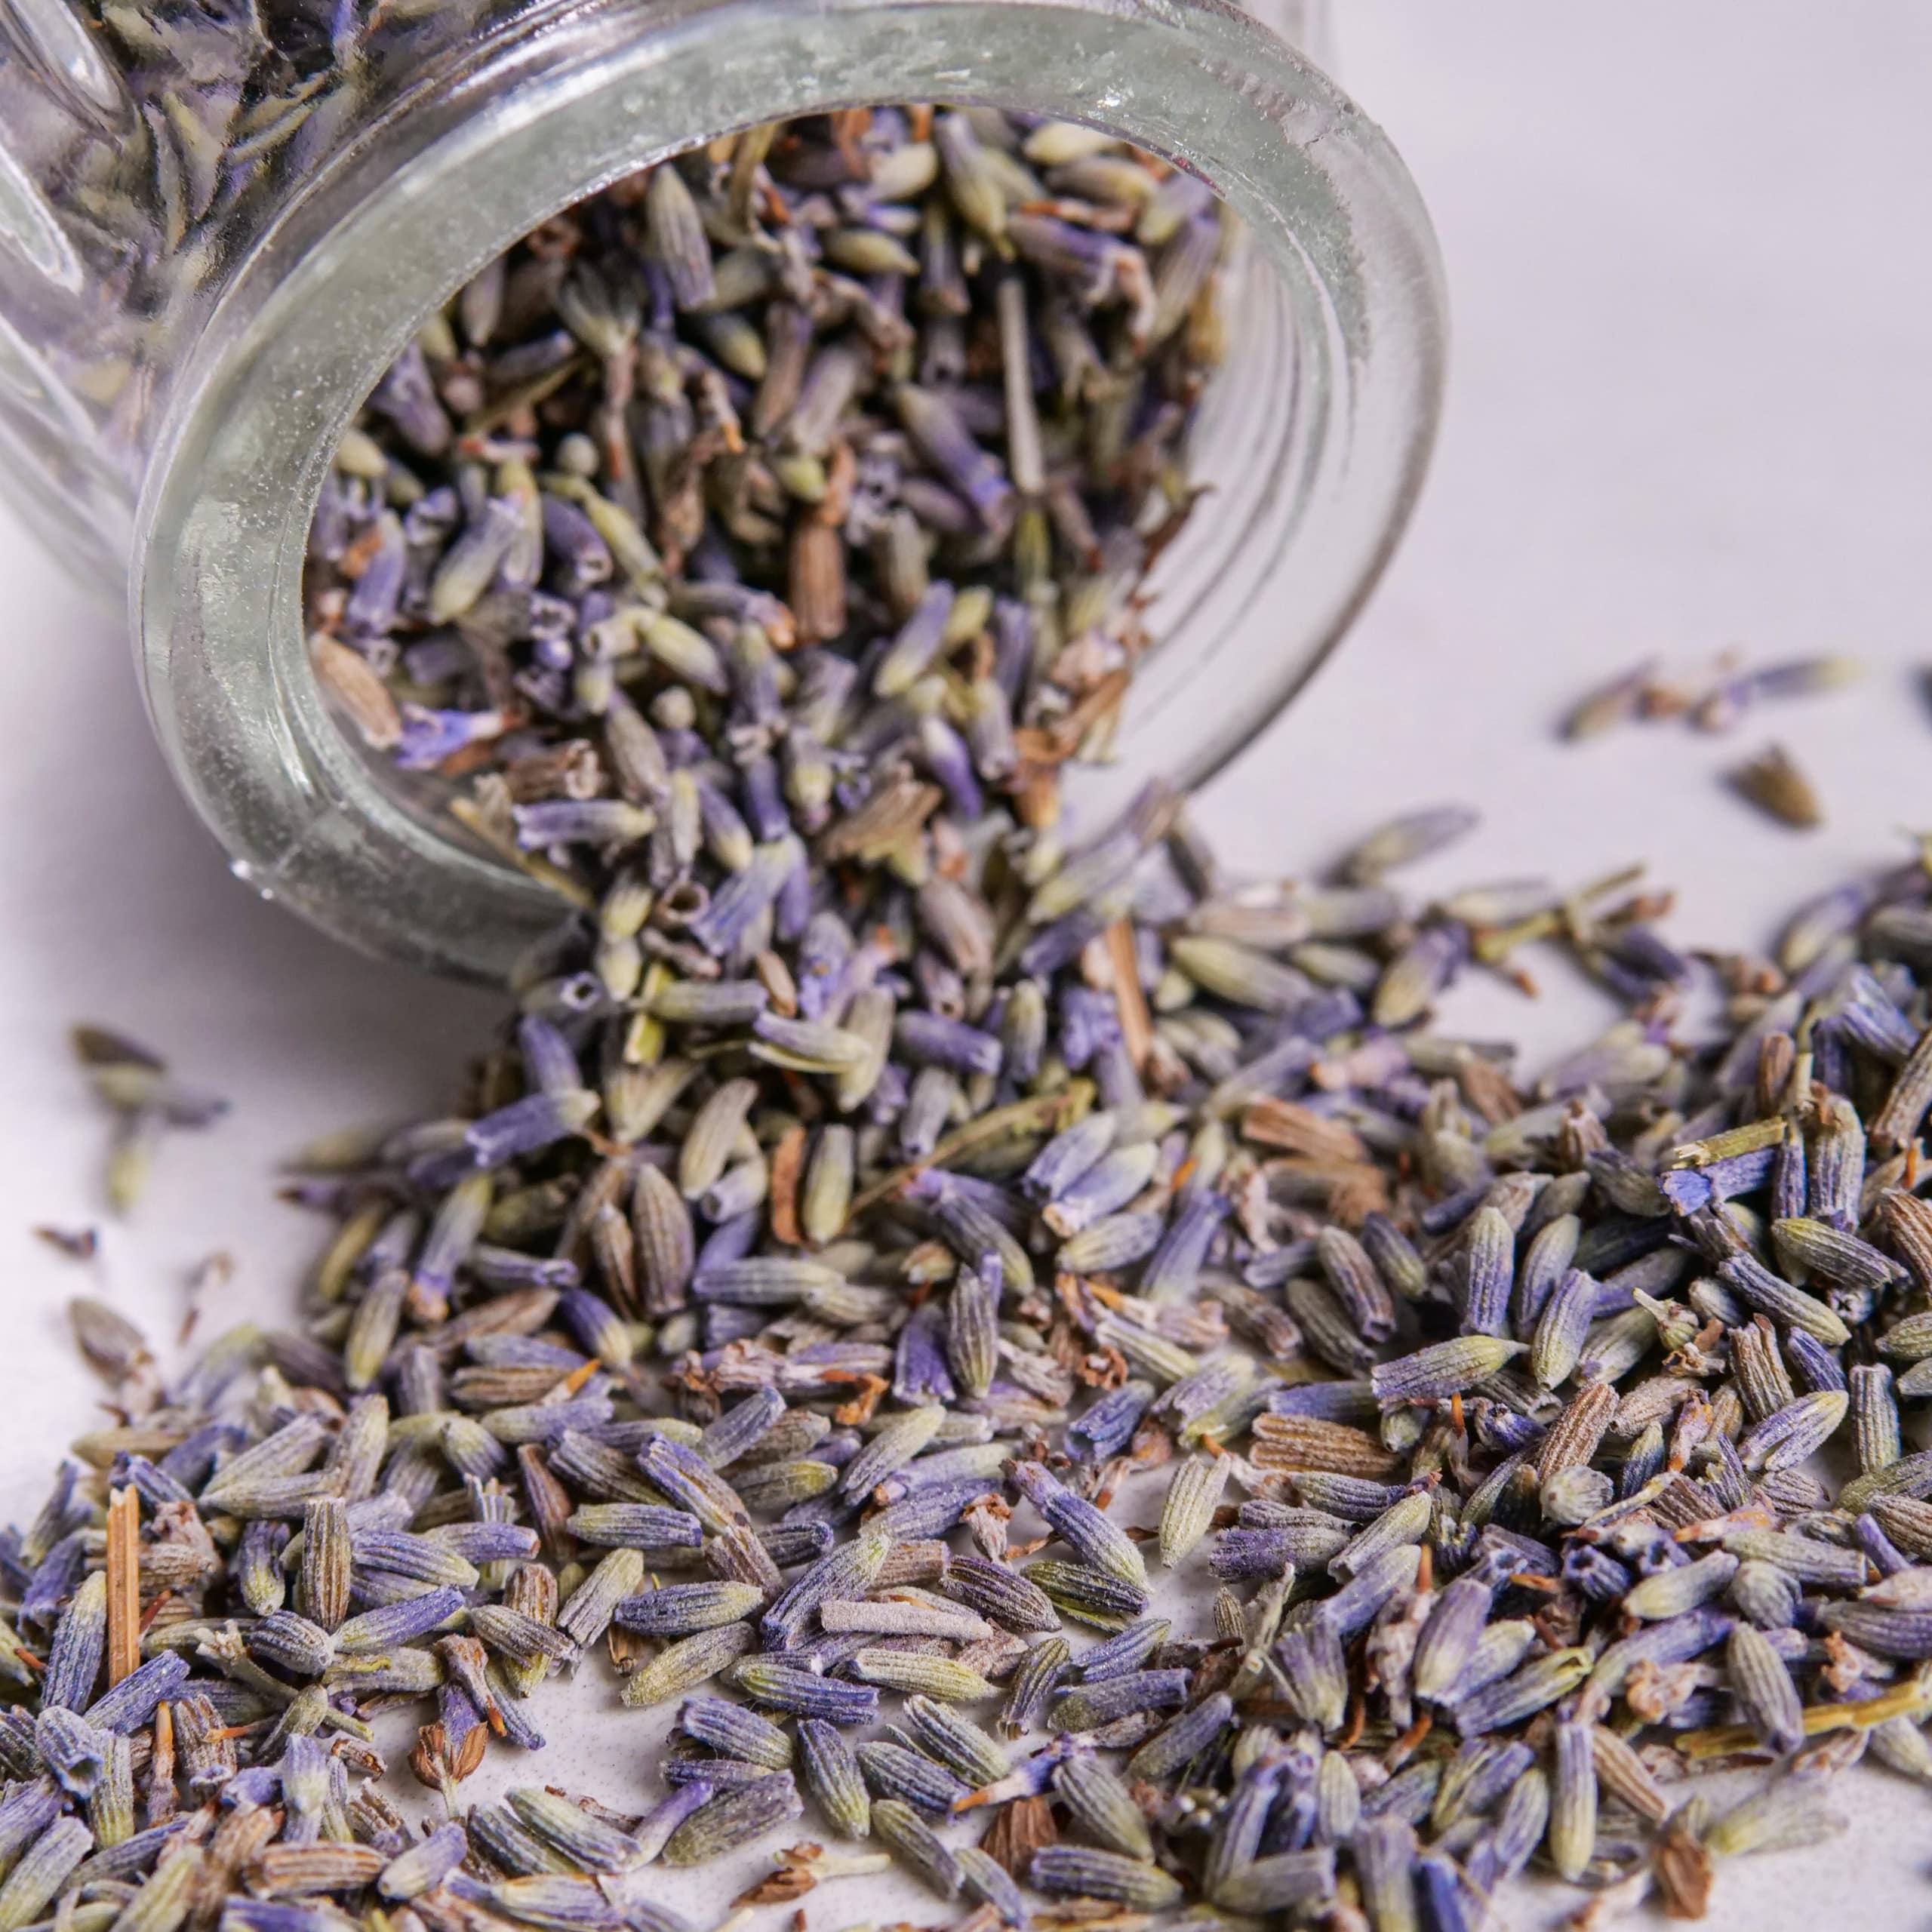 Dried Lavender Flowers - Dried Lavender Uses & Benefits